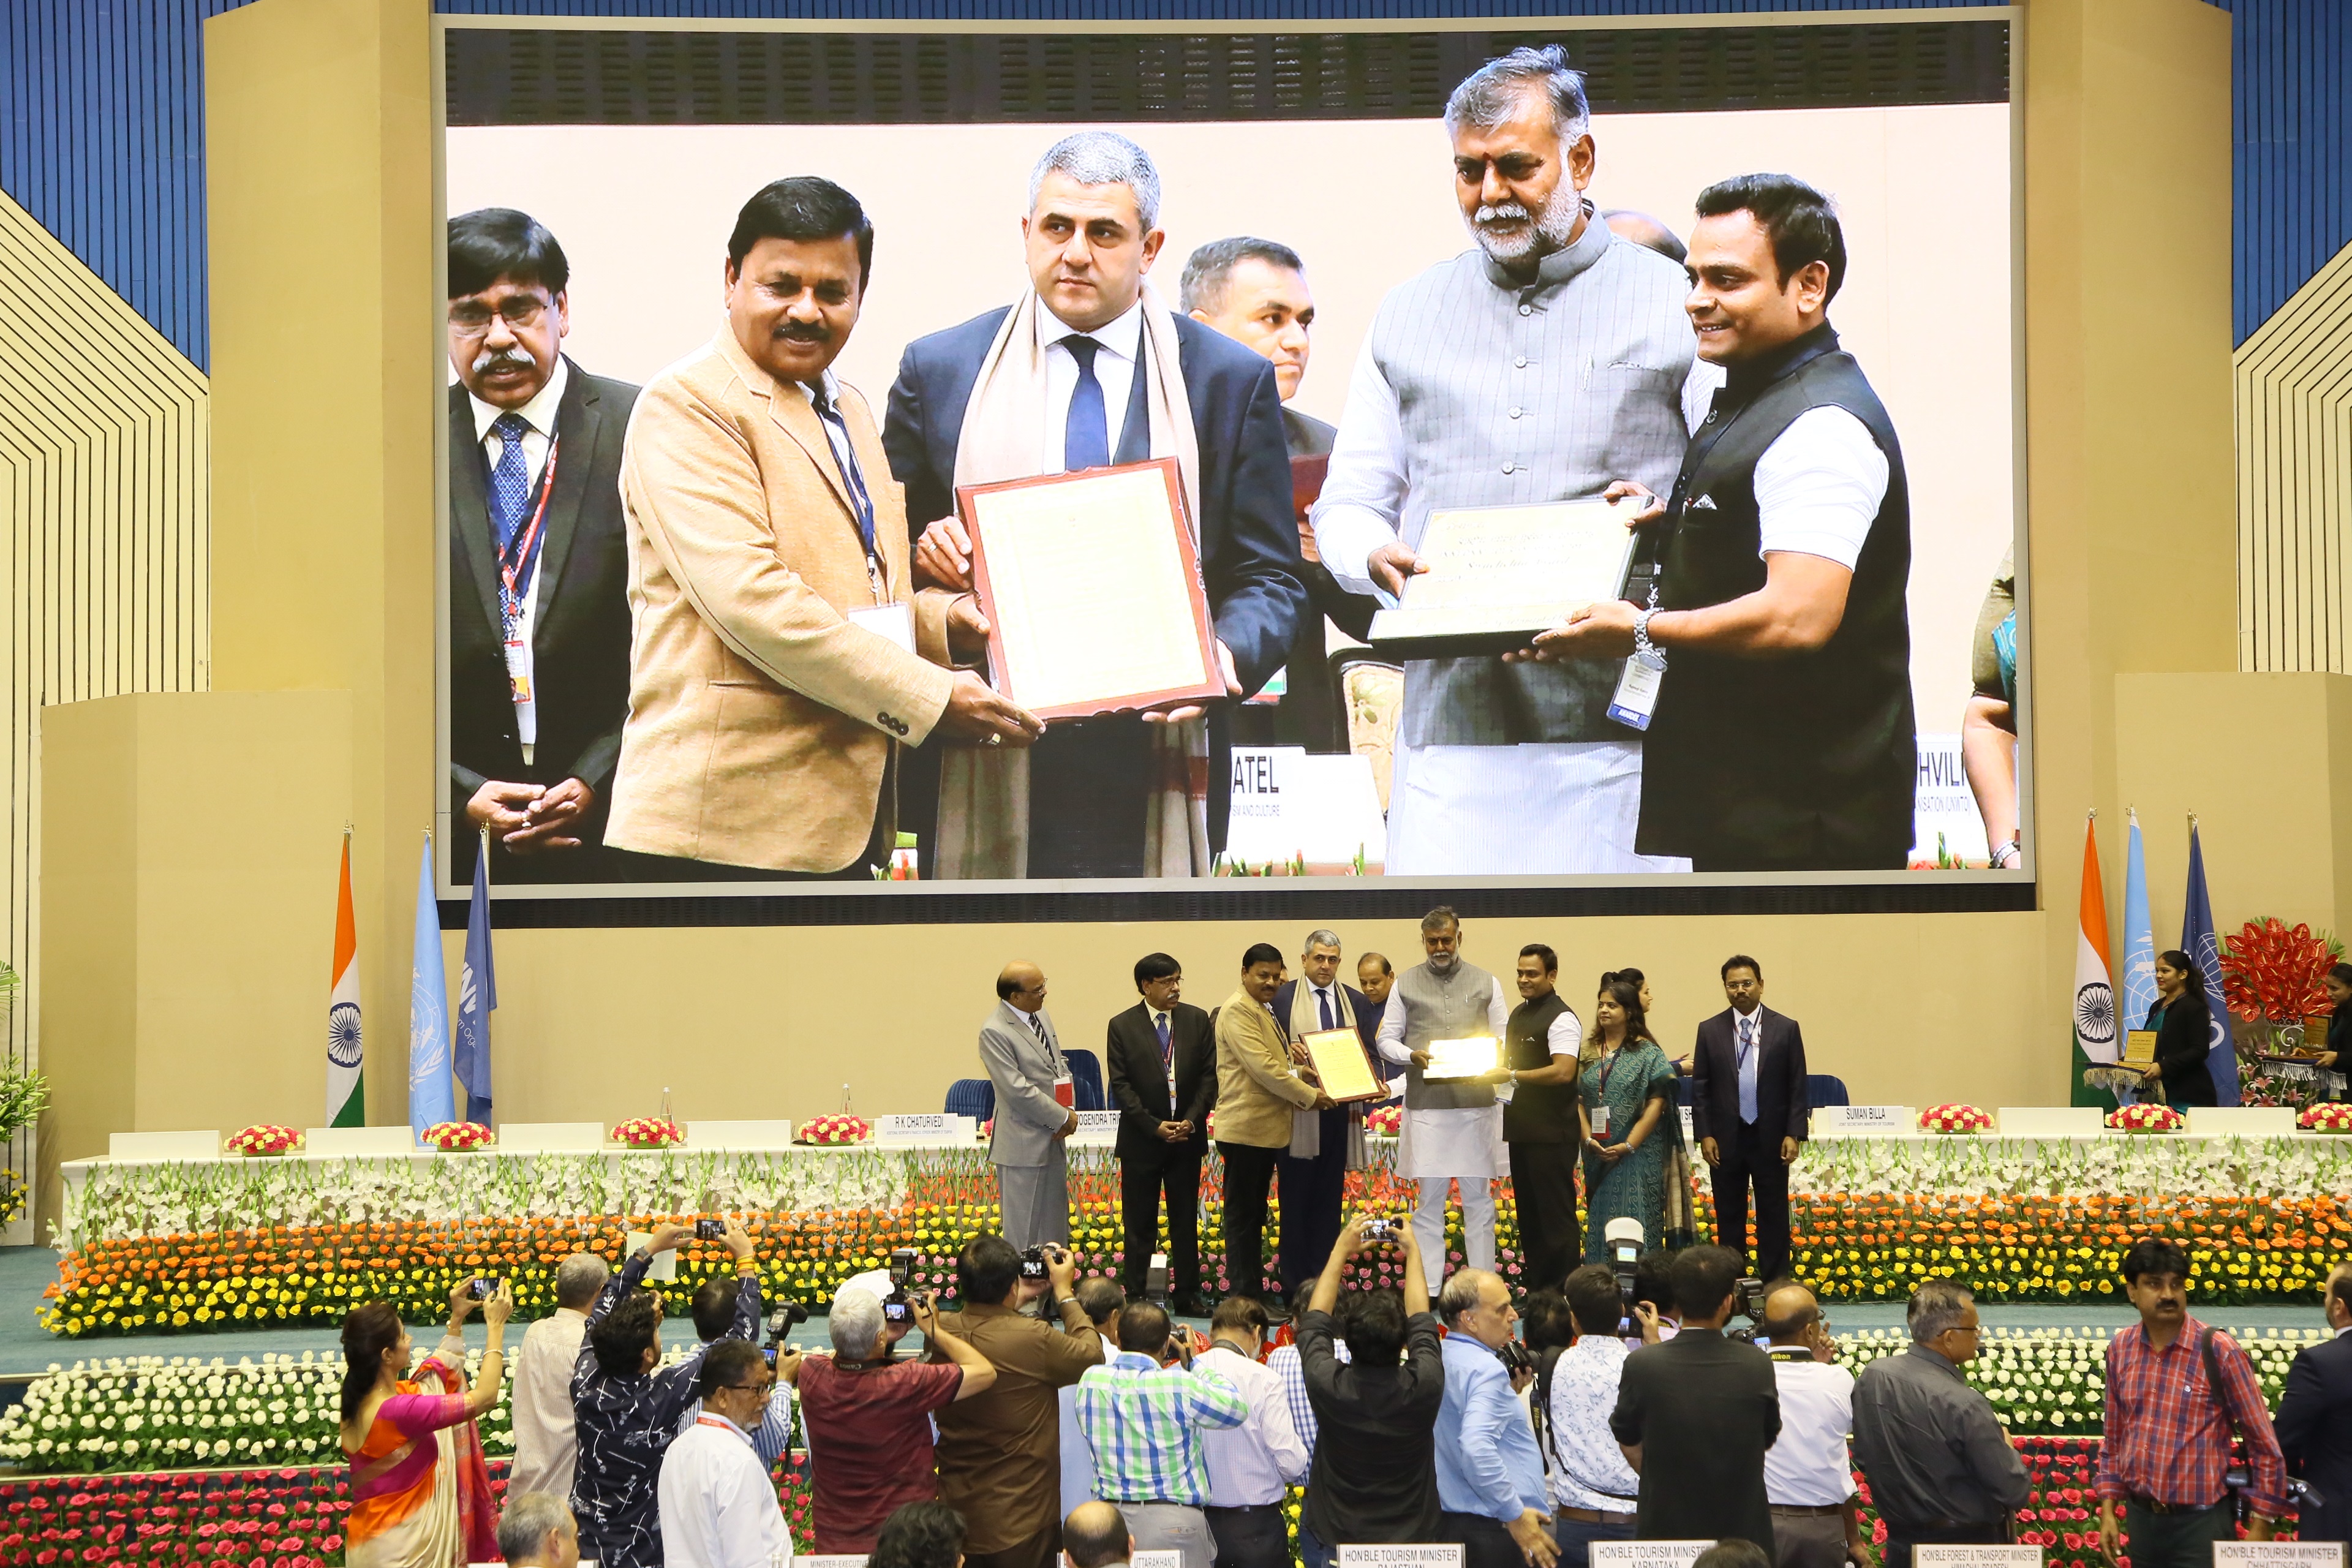 The World Tourism Day celebration & National Tourism Awards function was organized in New Delhi on 27 Sept, 2019. Hon’ble Vice President of India was the Chief Guest at the event, which was presided over by Hon’ble Tourism Minister of India in the presence of Secretary-General, UNWTO.